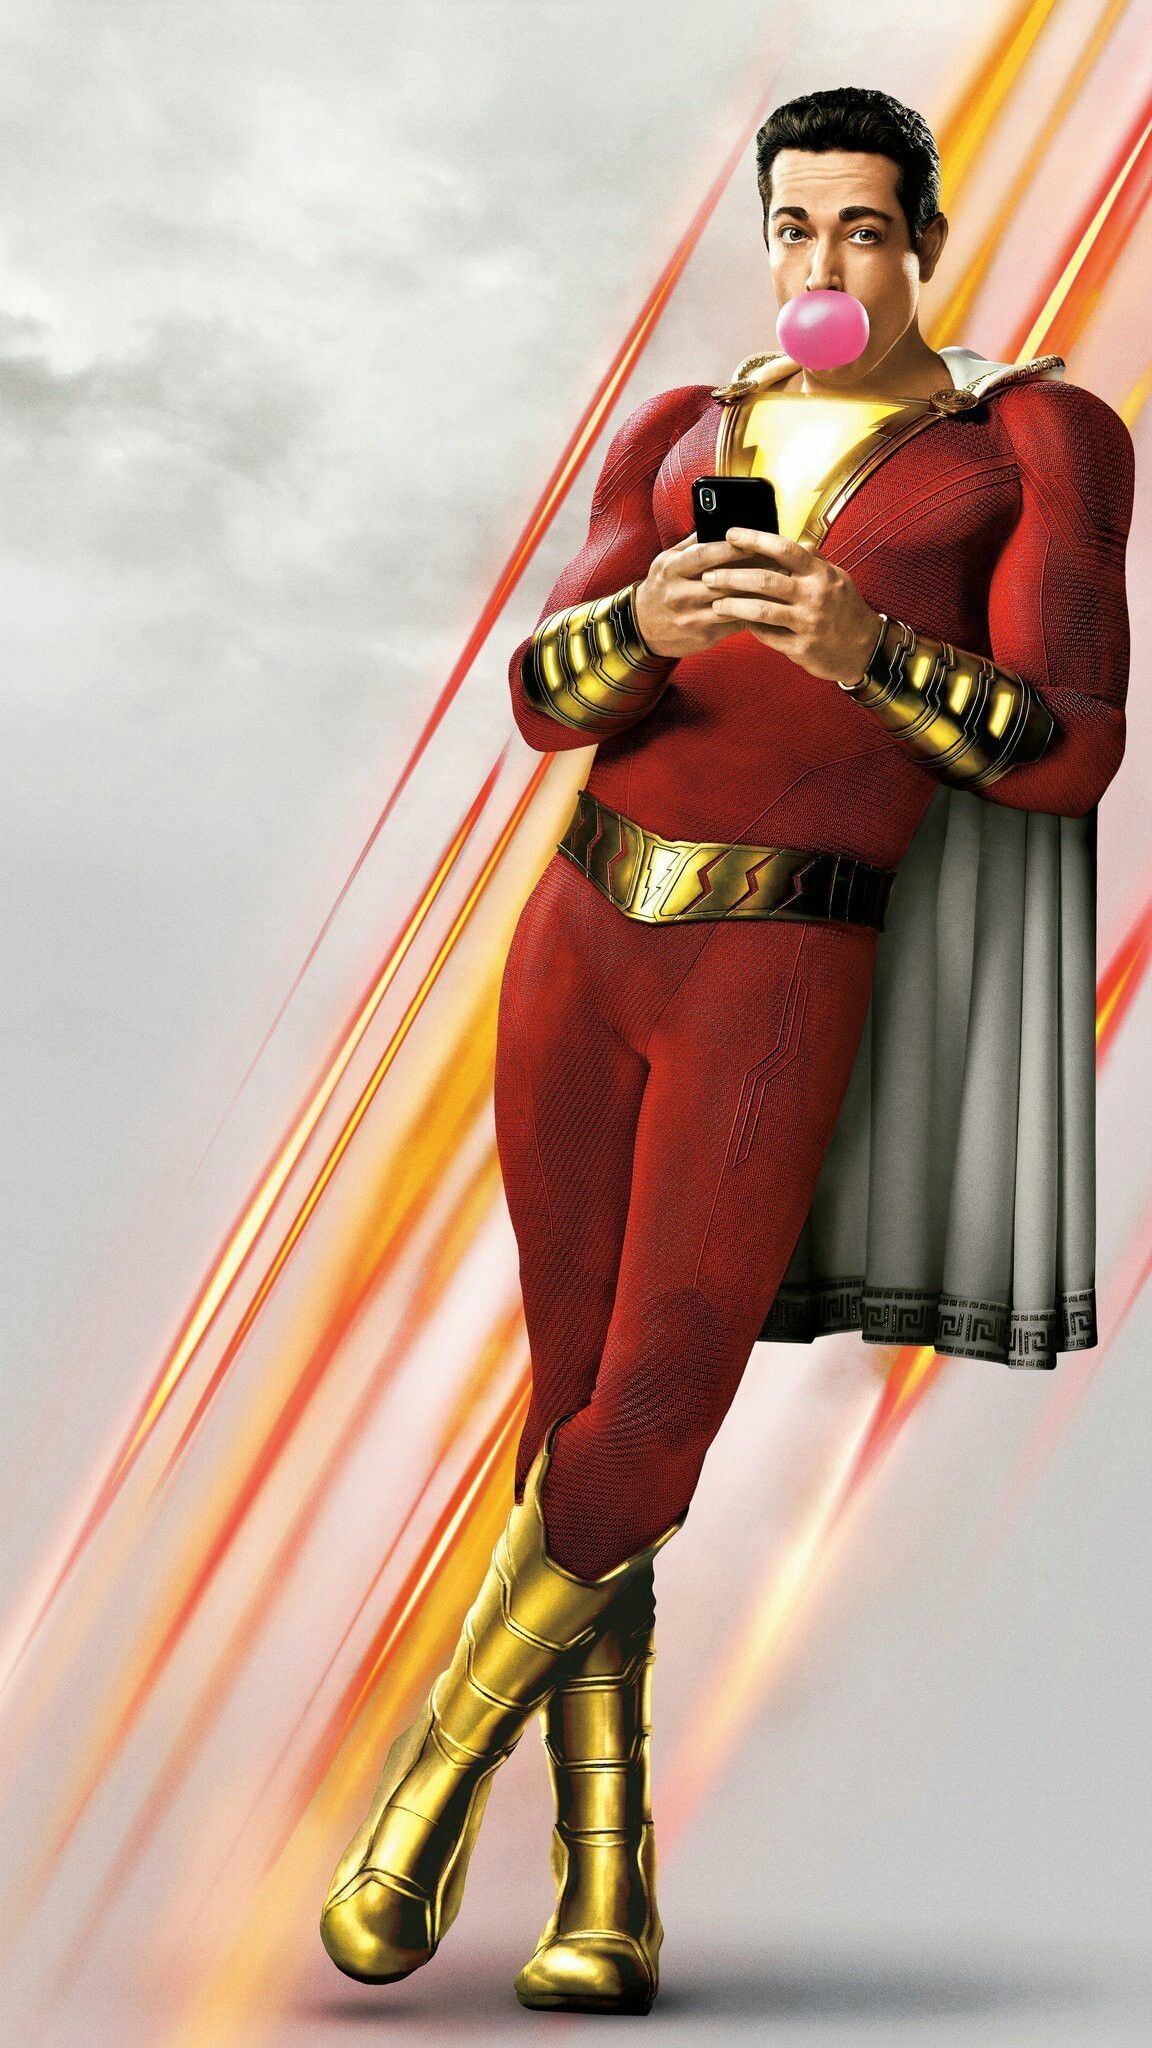 New Shazam Movie Poster Wallpapers